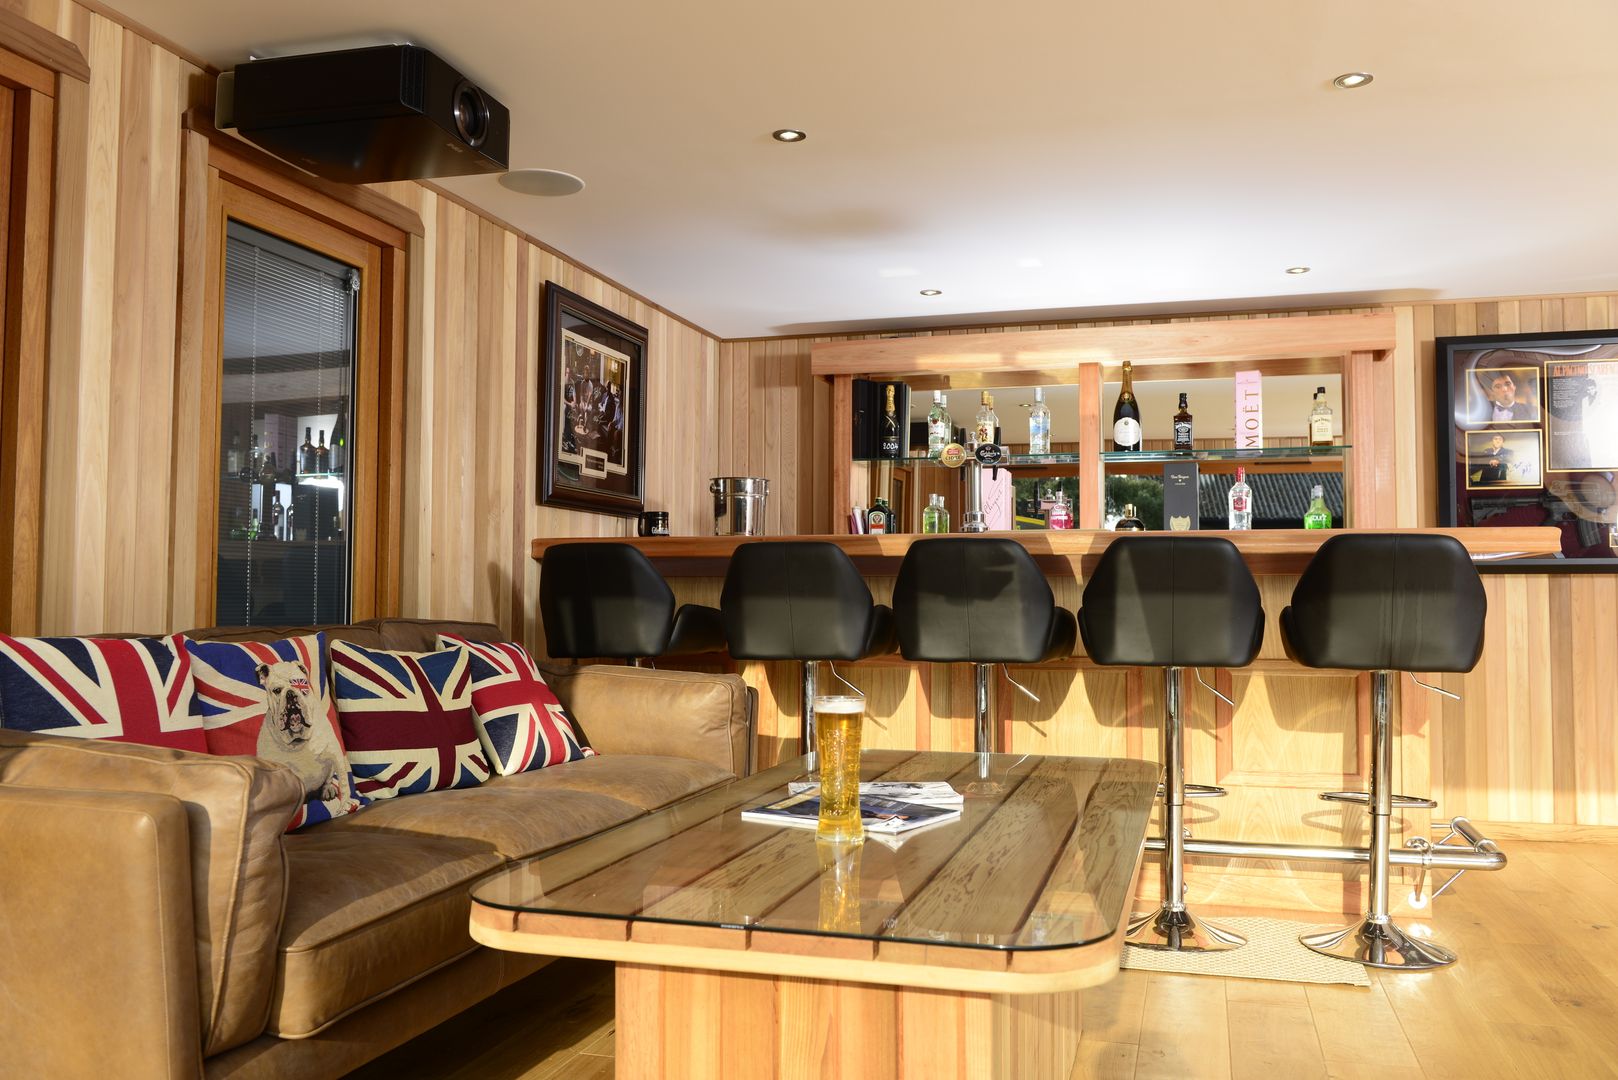 Bespoke garden cinema room with a bar: Garden buildings and summer houses, Crown Pavilions Crown Pavilions Modern garage/shed